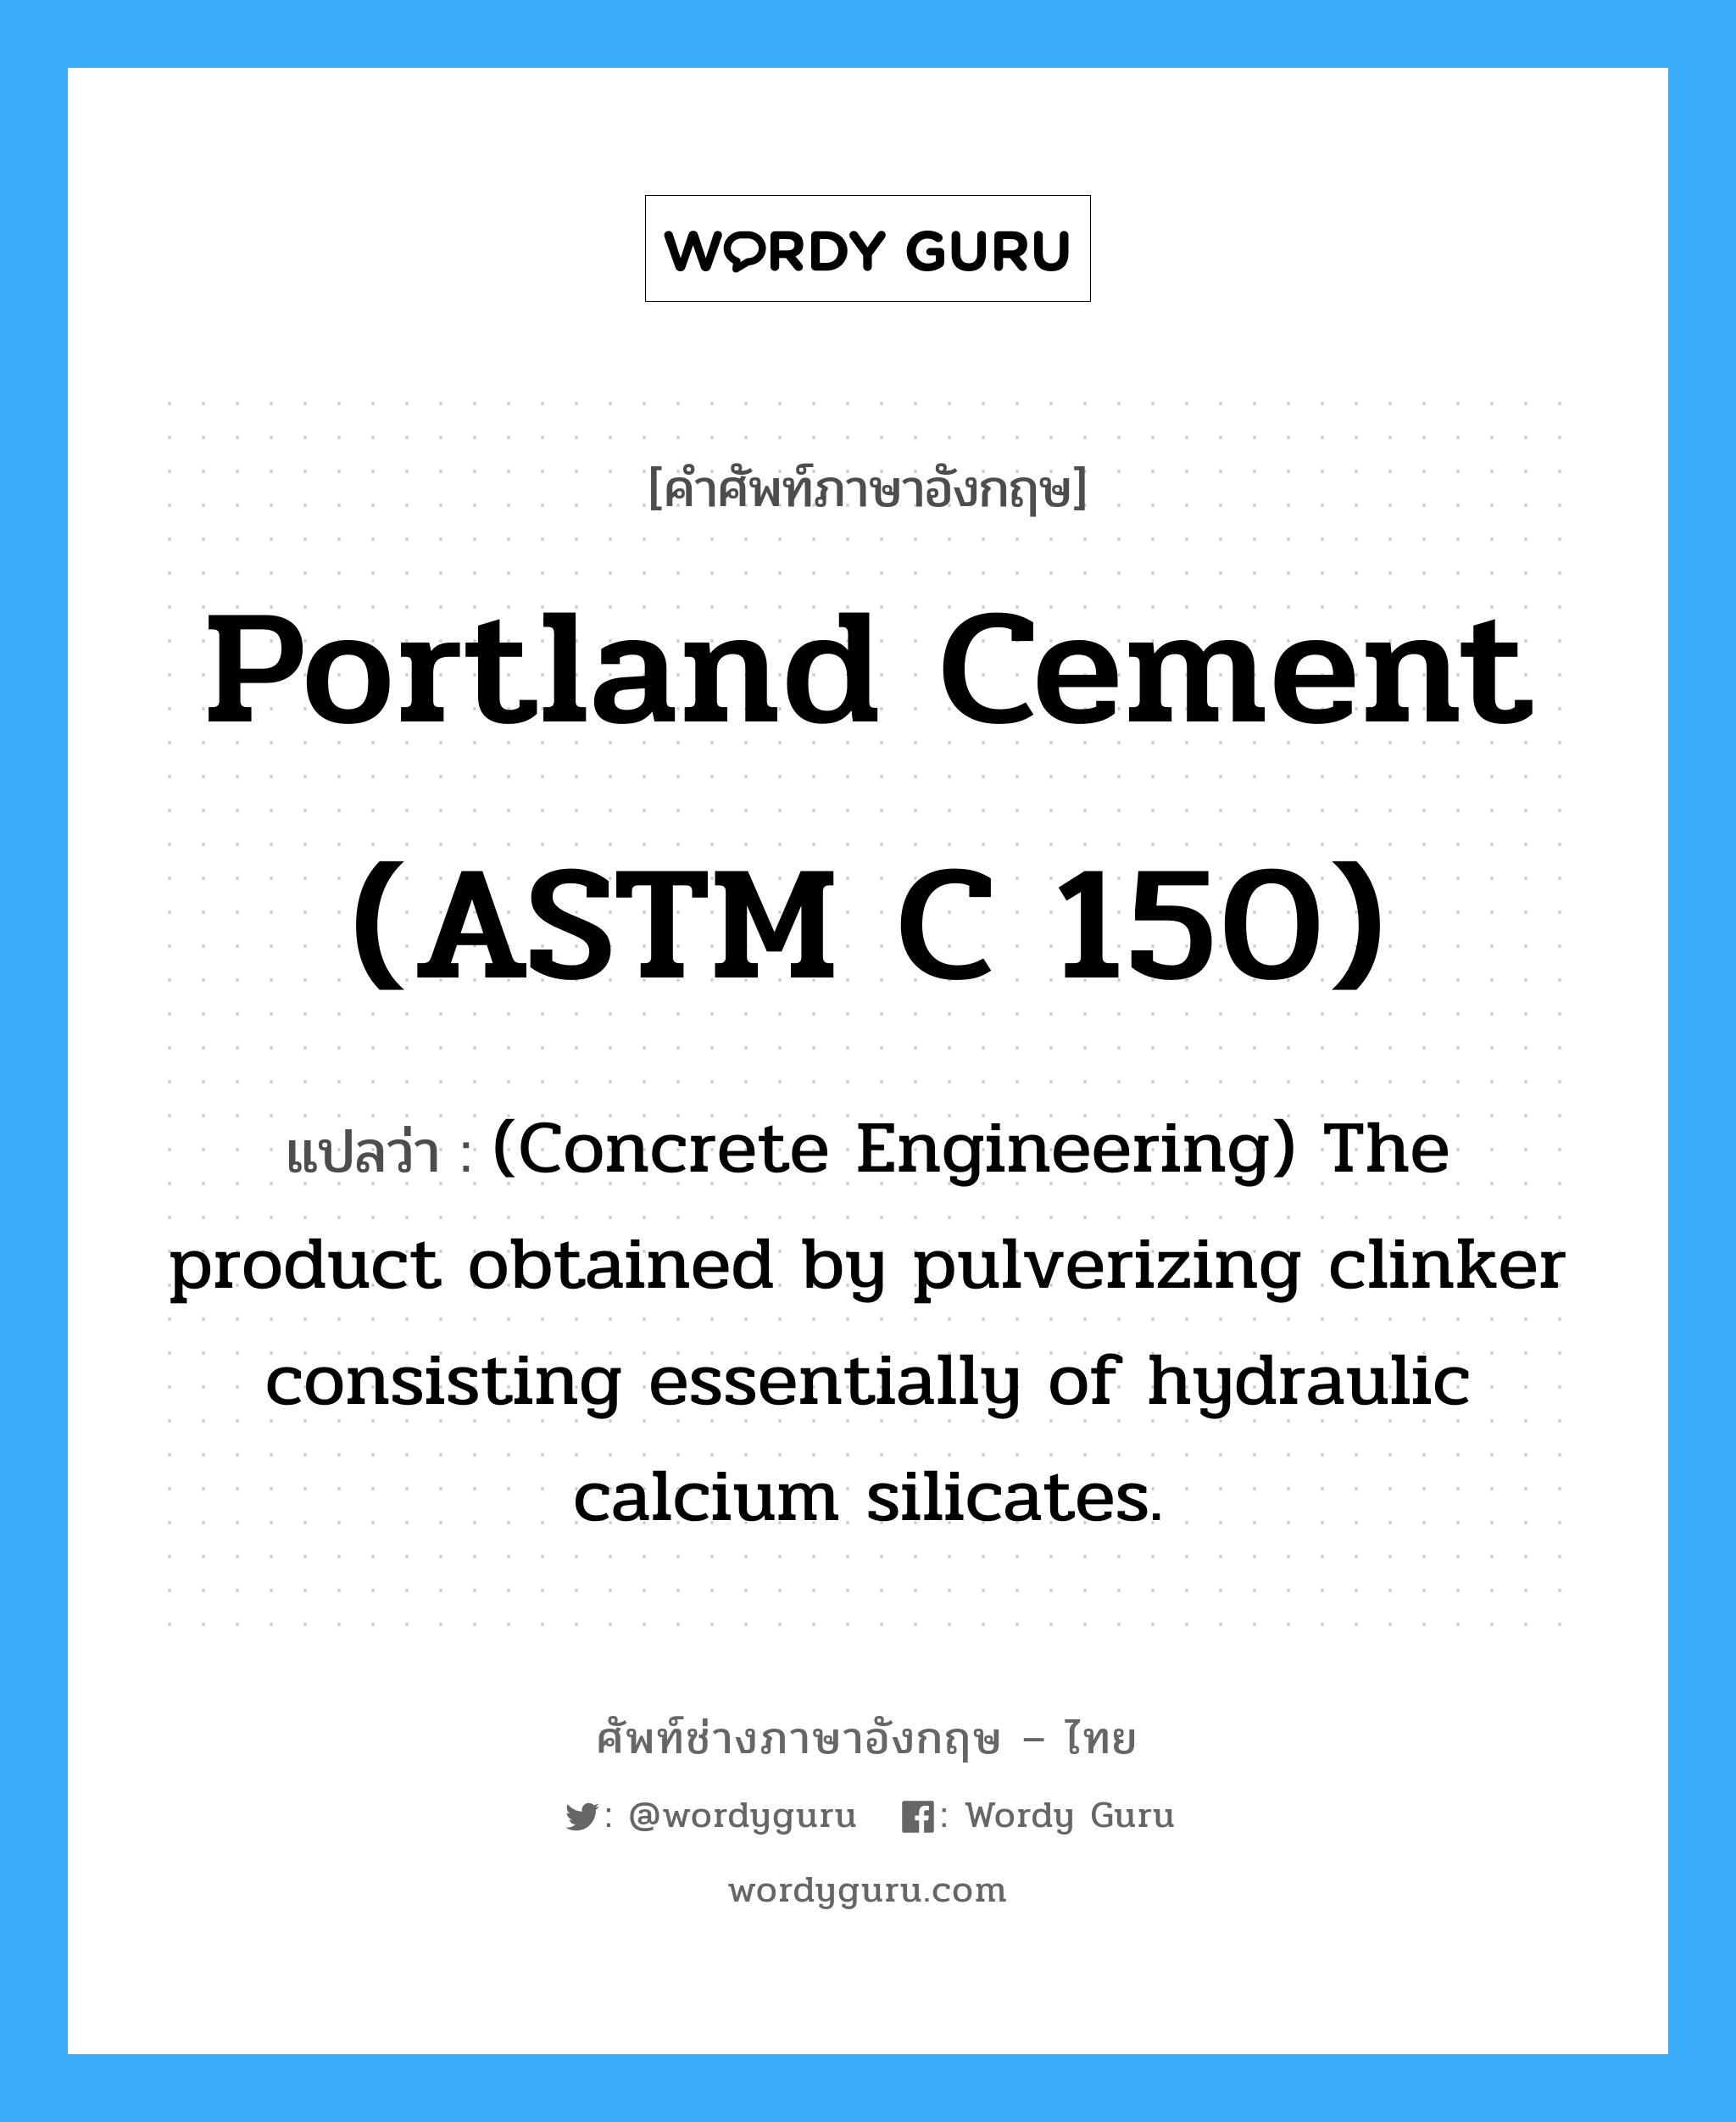 Portland Cement (ASTM C 150) แปลว่า?, คำศัพท์ช่างภาษาอังกฤษ - ไทย Portland Cement (ASTM C 150) คำศัพท์ภาษาอังกฤษ Portland Cement (ASTM C 150) แปลว่า (Concrete Engineering) The product obtained by pulverizing clinker consisting essentially of hydraulic calcium silicates.